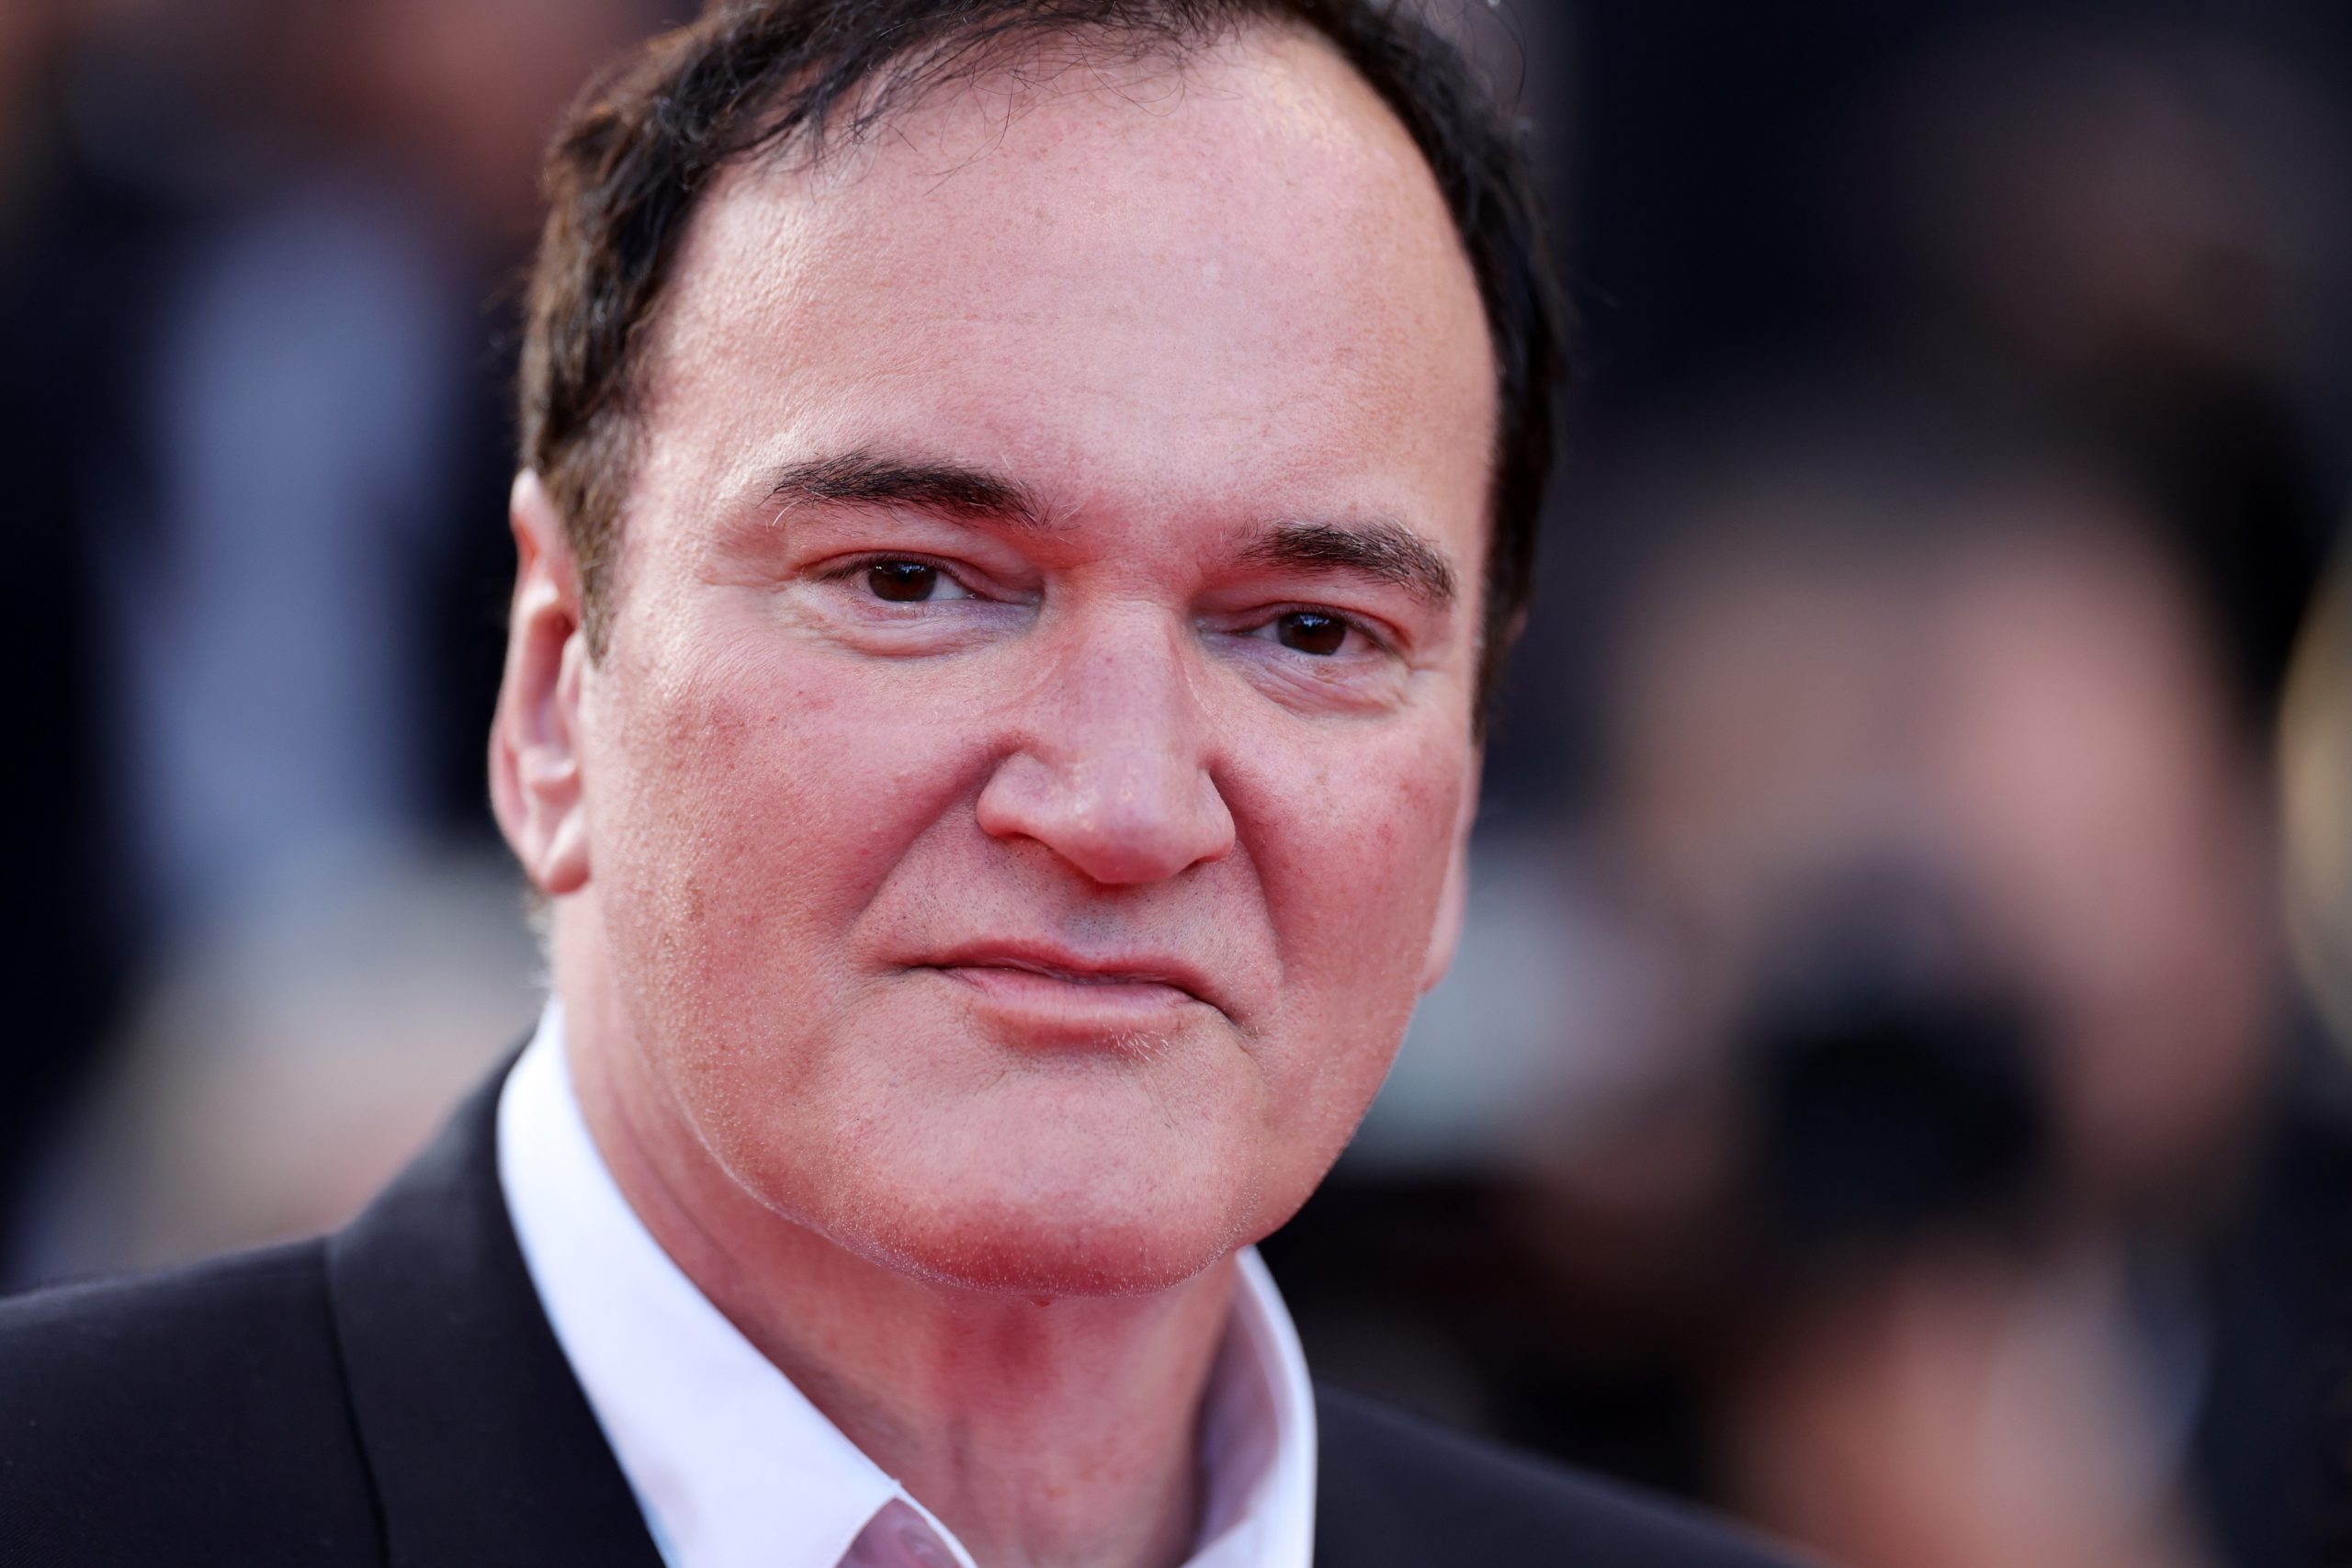 Quentin Tarantino: Why He Never Made a “Star Trek” Movie – Even Though It Was His Dream